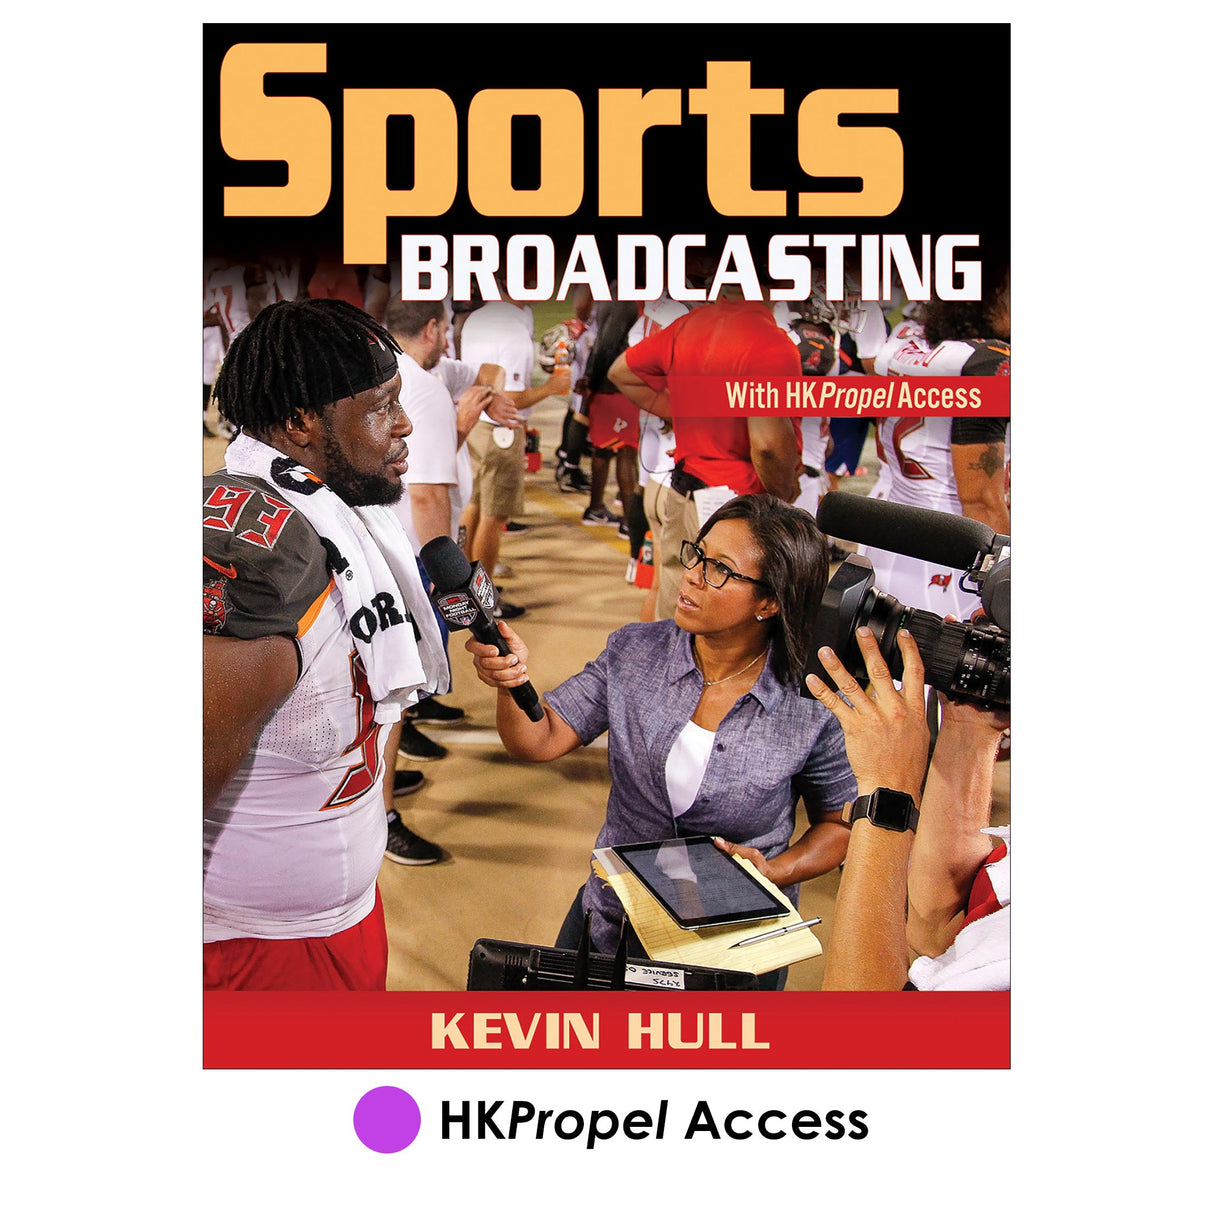 Sports Broadcasting HKPropel Access